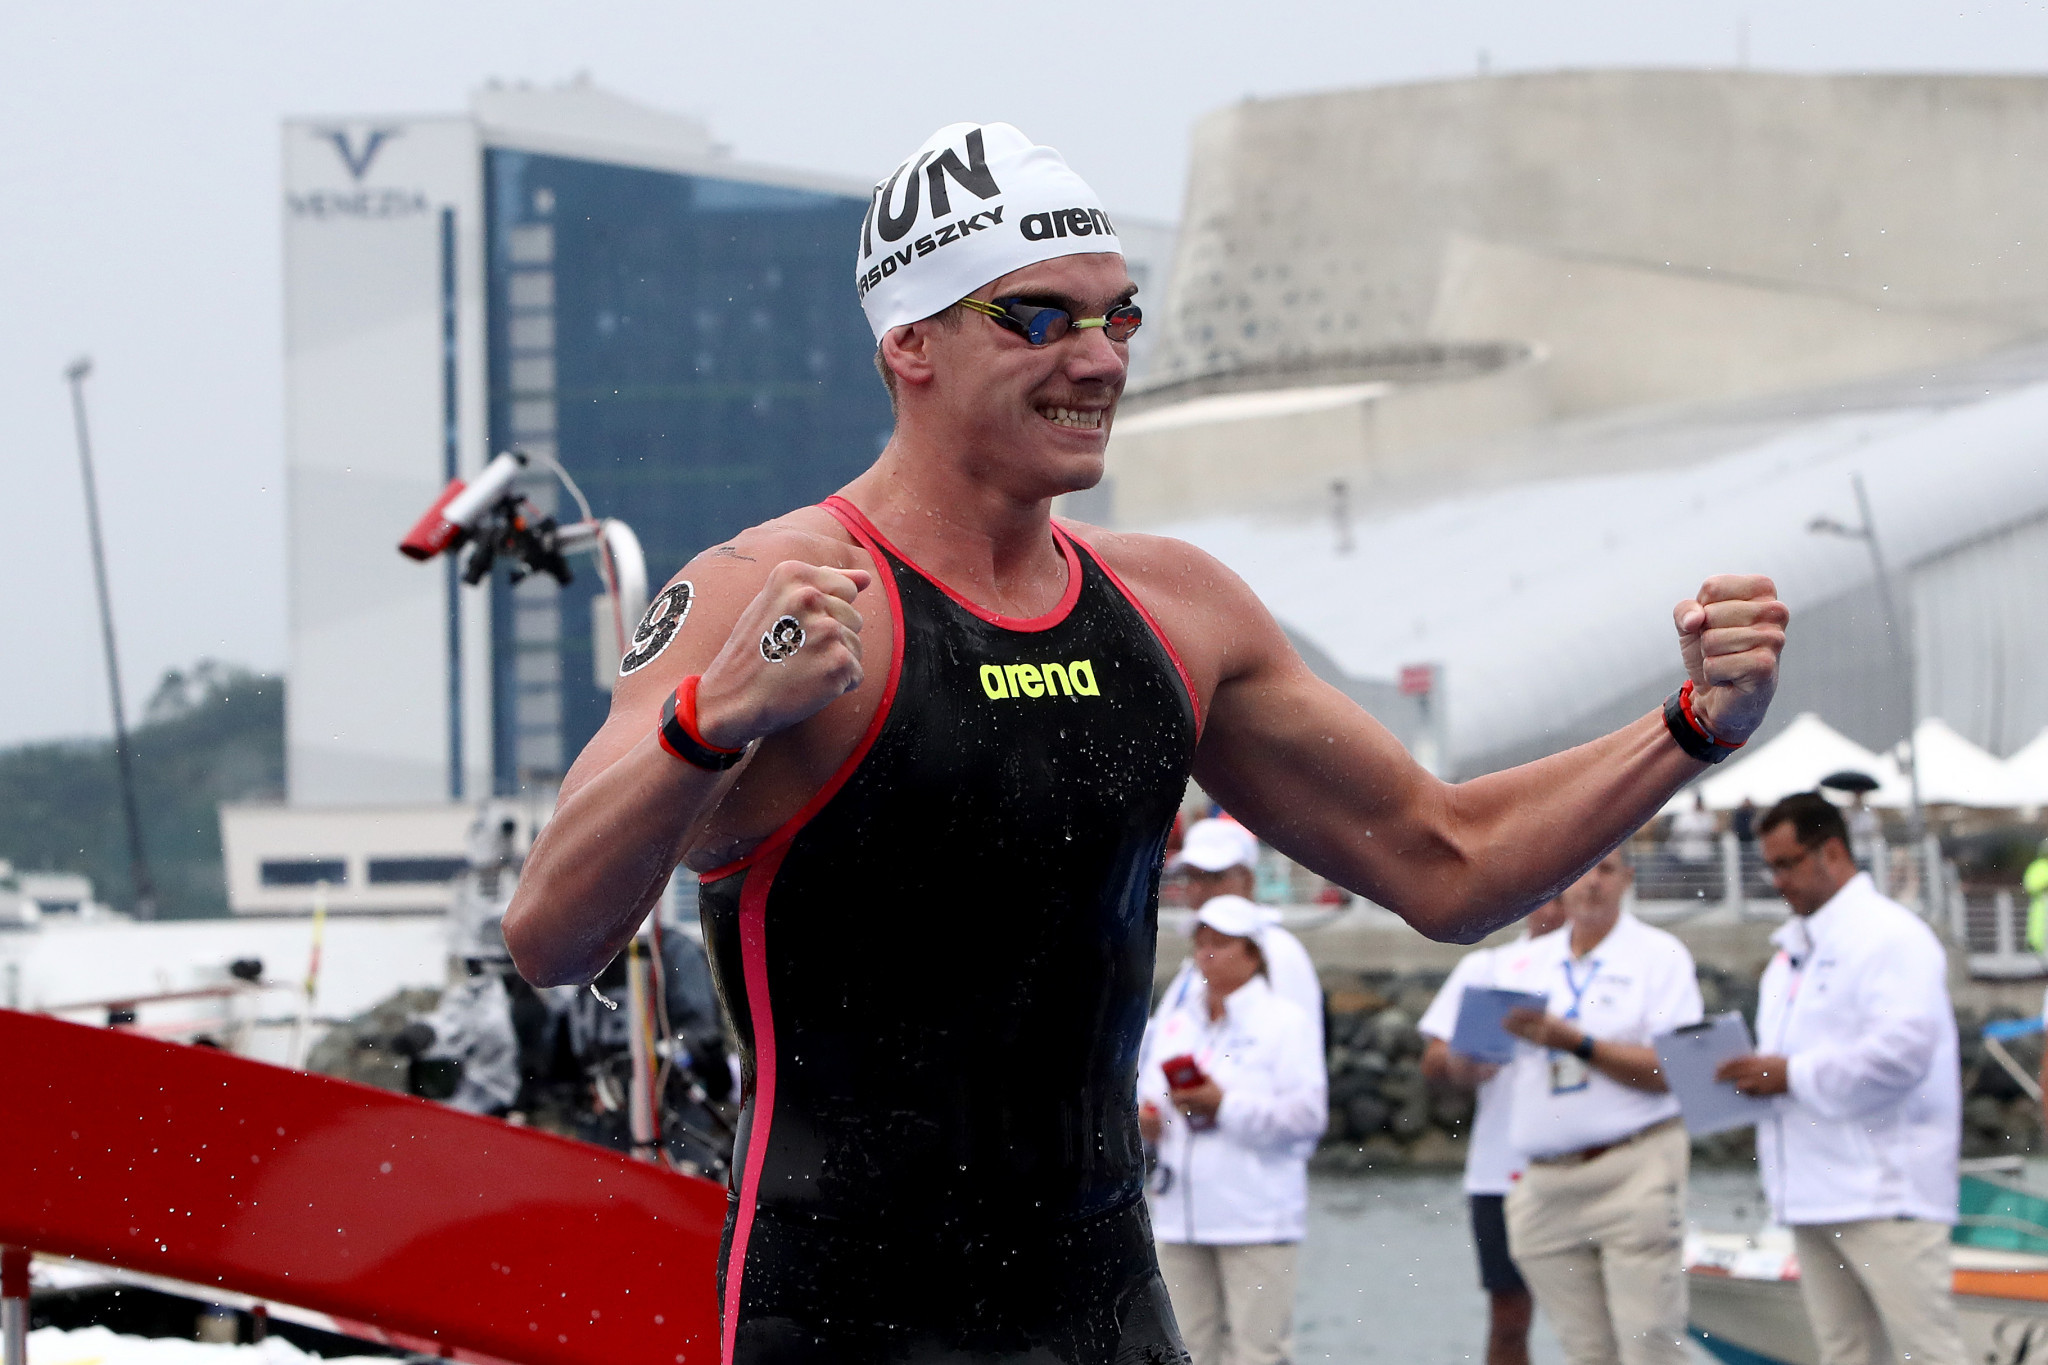 Recently-crowned world champion Rasovszky set to compete at FINA Marathon Swim World Series